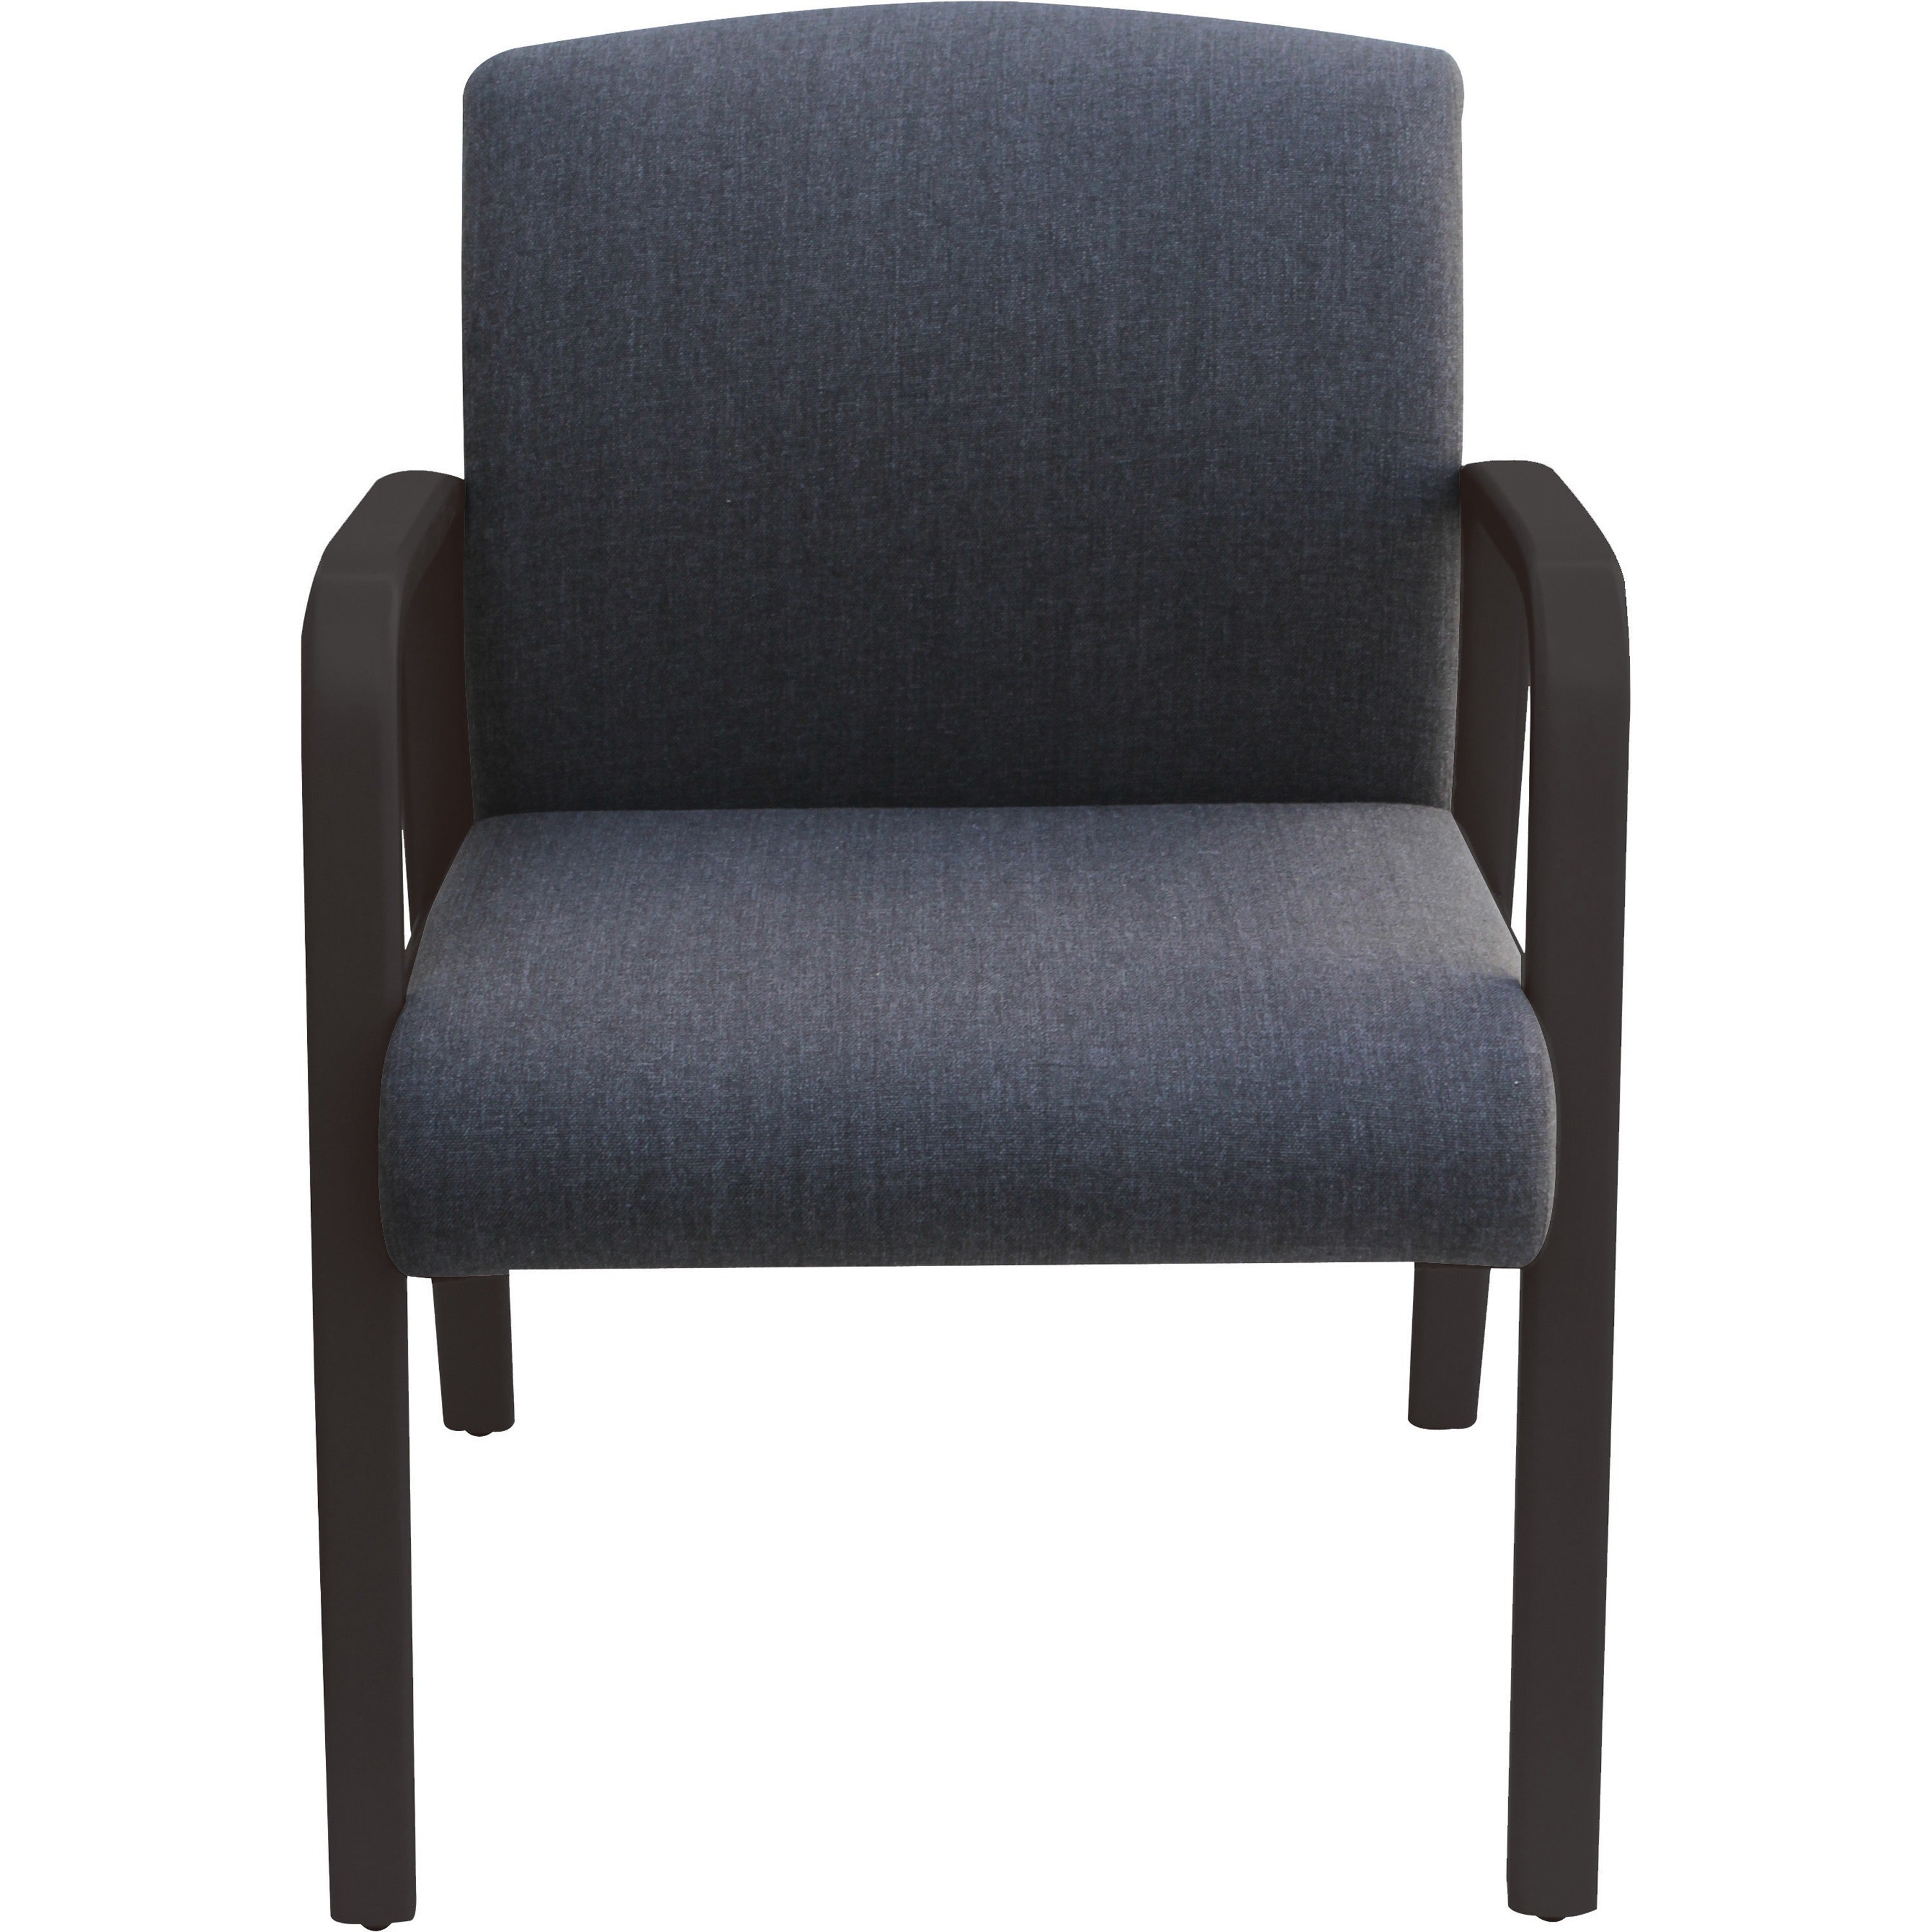 lorell-flannel-upholstered-guest-chair-gray-black-fabric-seat-wood-frame-mid-back-four-legged-base-gray-black-armrest-1-each_llr68559 - 2